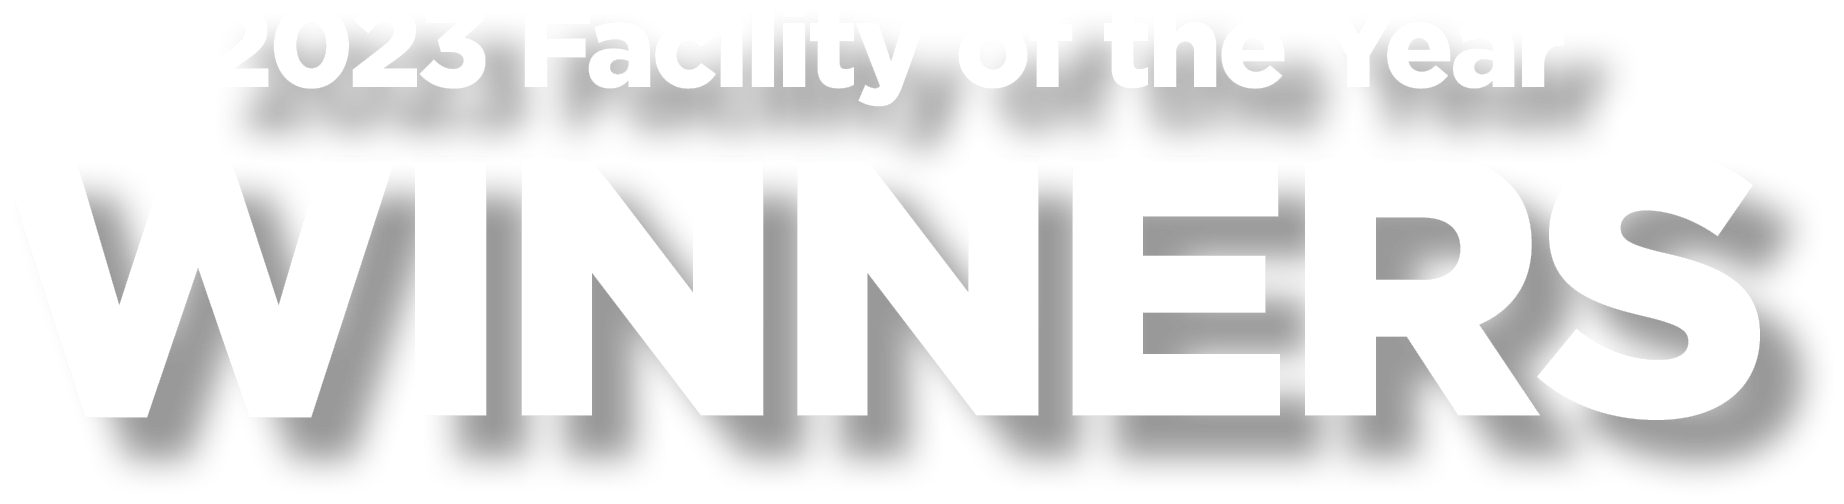 2023 Facility of the Year Winners